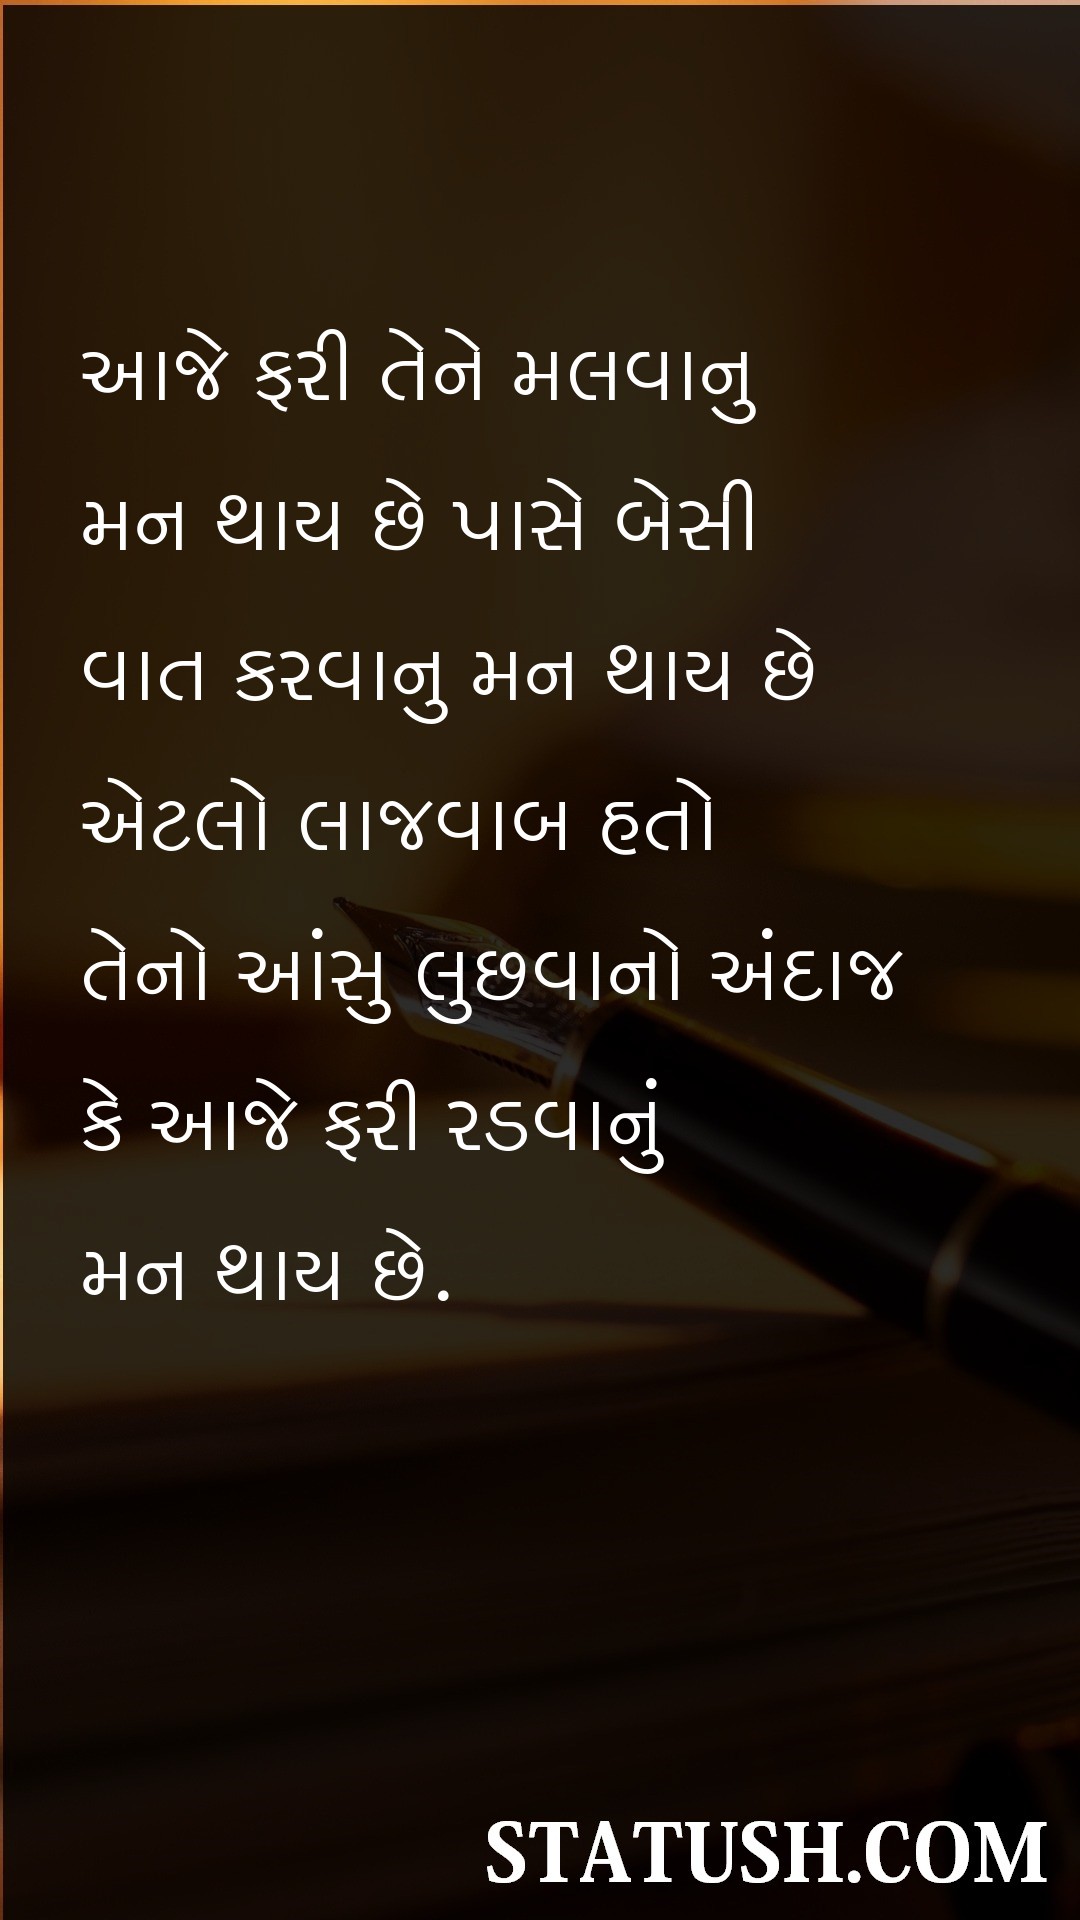 Today I would like to meet her again Gujarati Quotes at statush.com